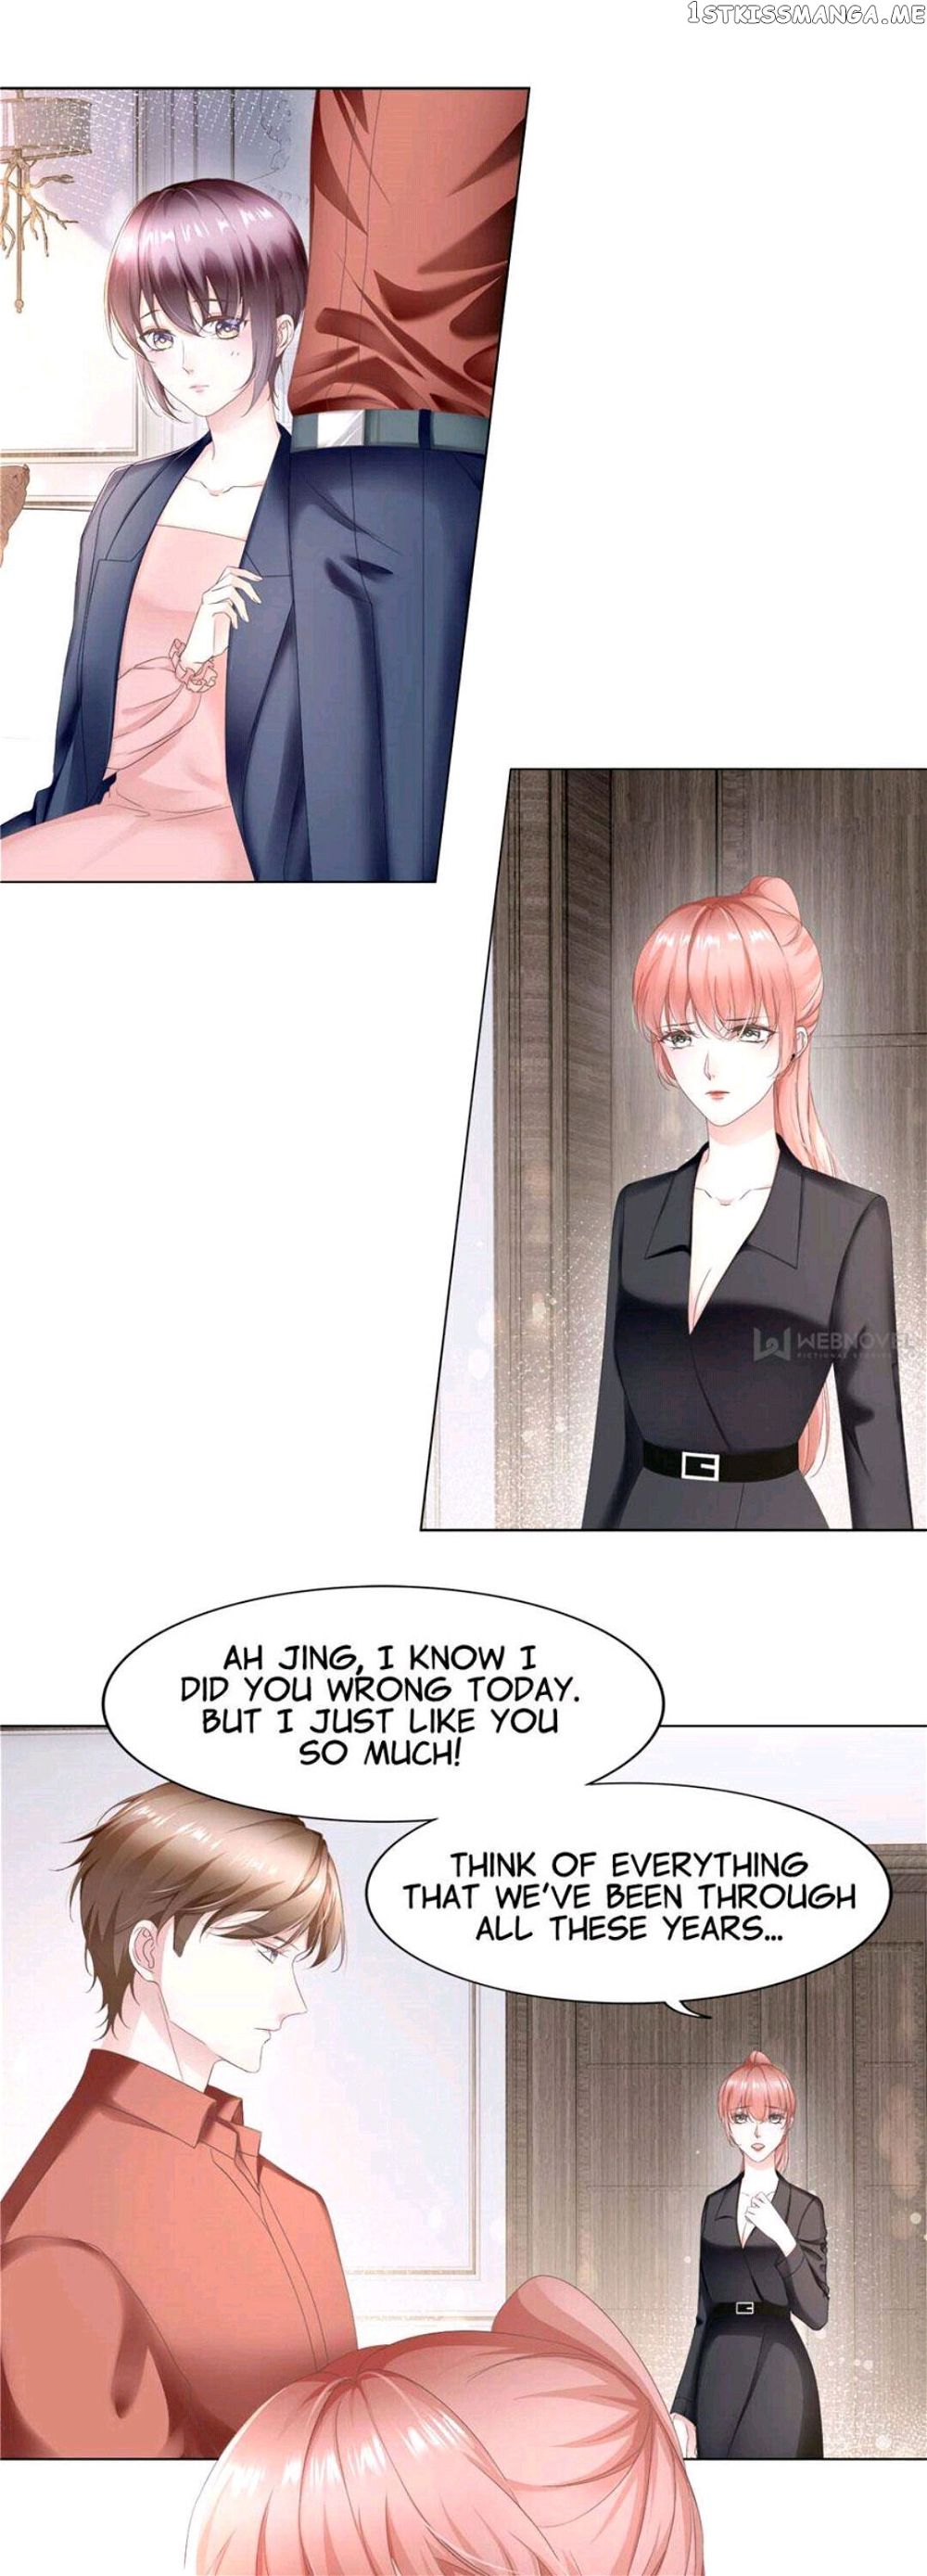 Devil in the Suit chapter 70 - Page 2